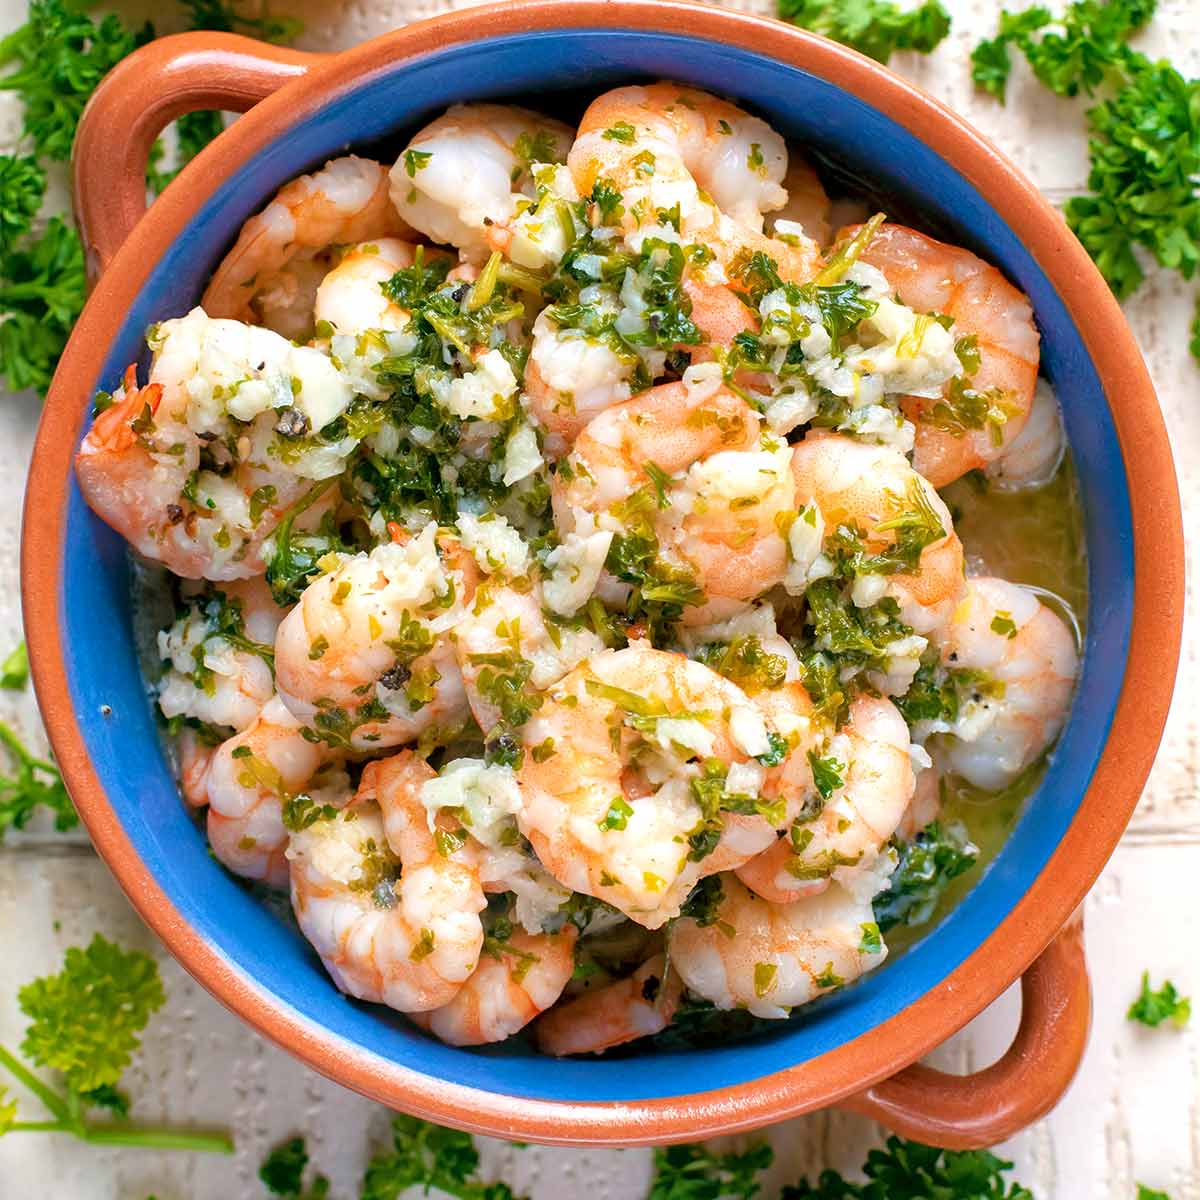 What Herbs Go With Shrimp